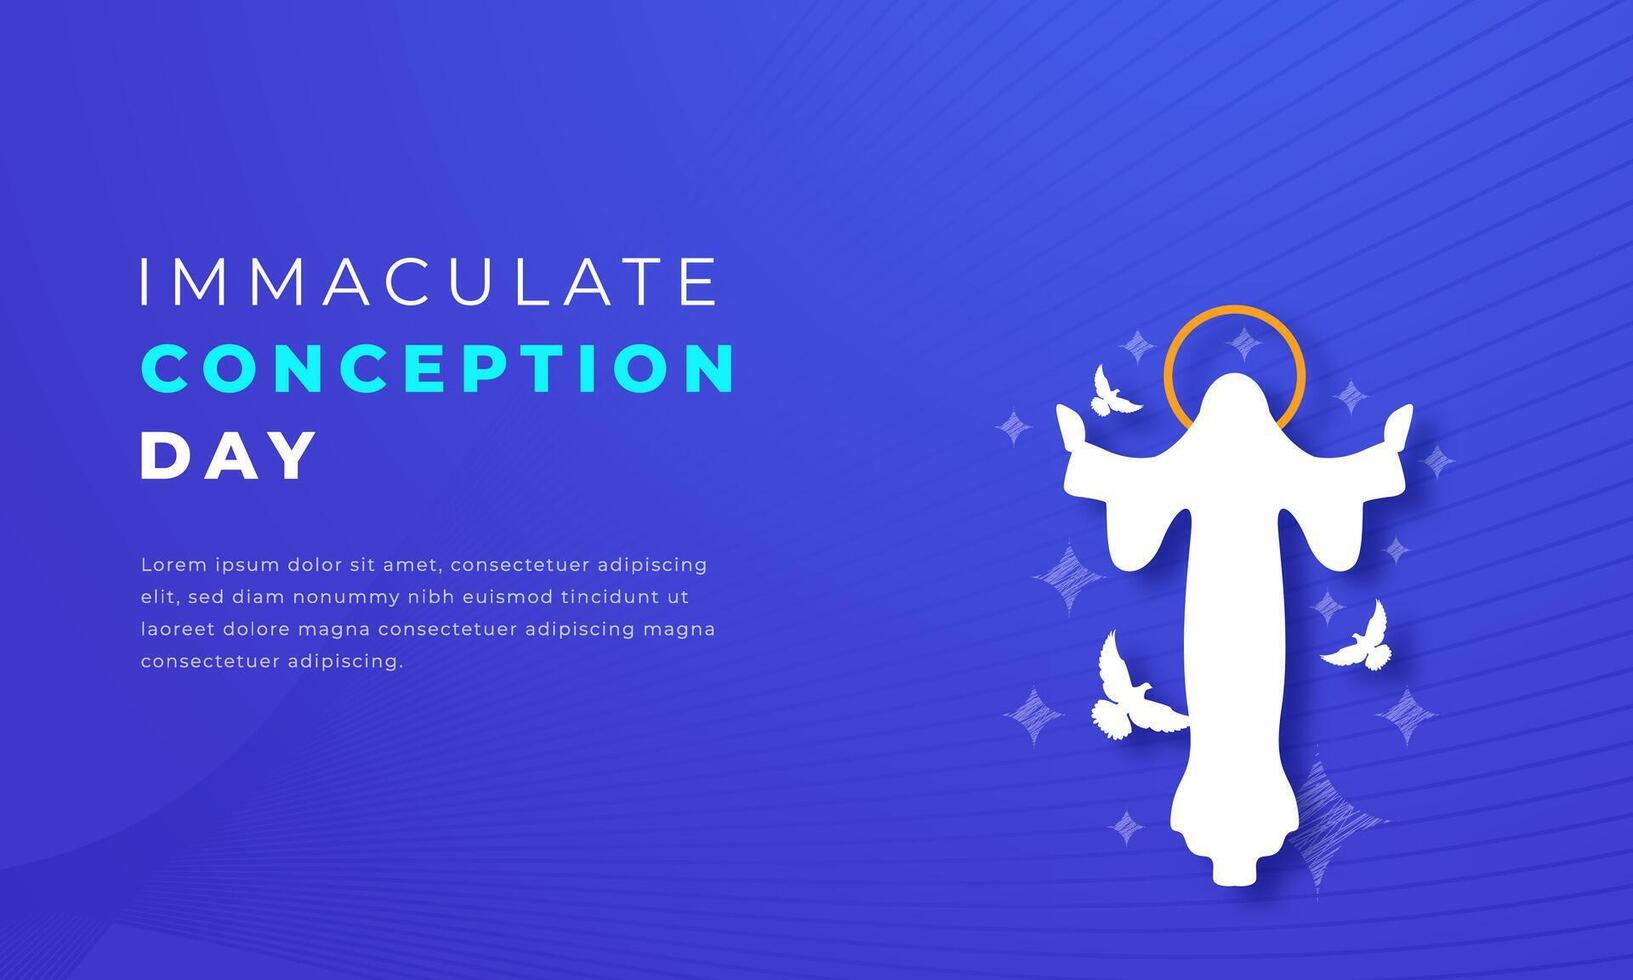 Immaculate Conception Day Paper cut style Vector Design Illustration for Background, Poster, Banner, Advertising, Greeting Card